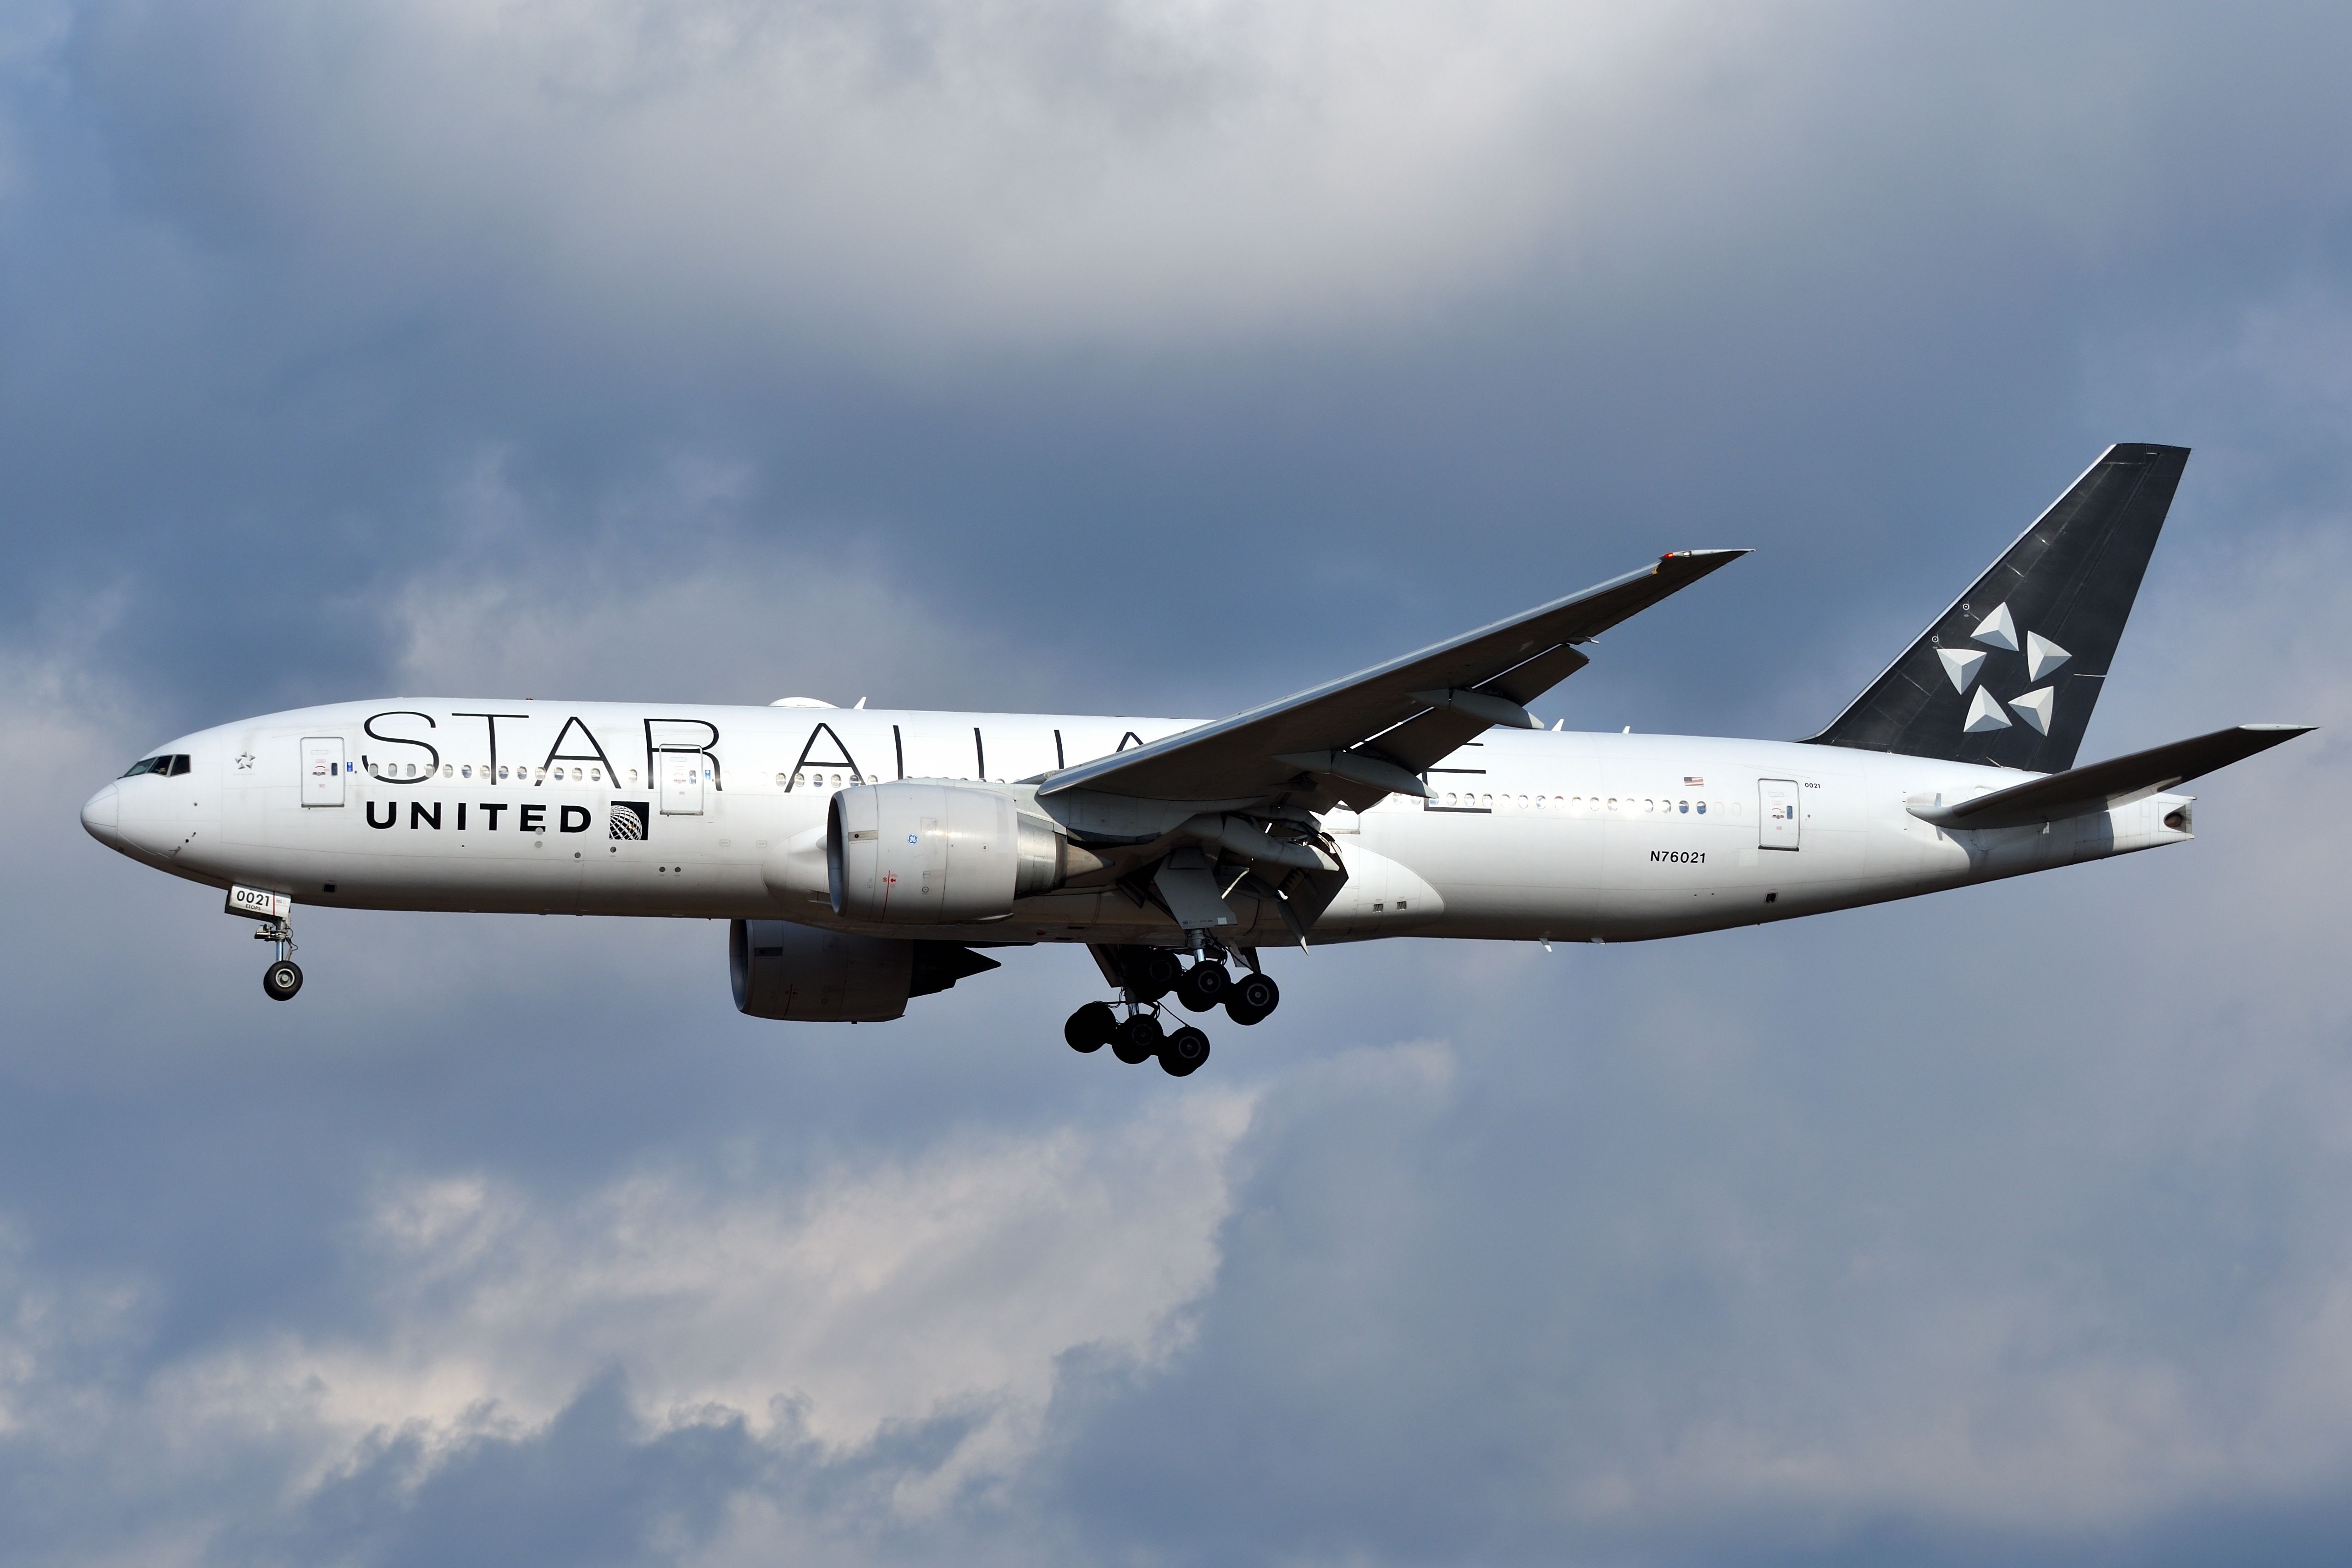 A United Airlines Boeing 777 in Star Alliance livery about to land.